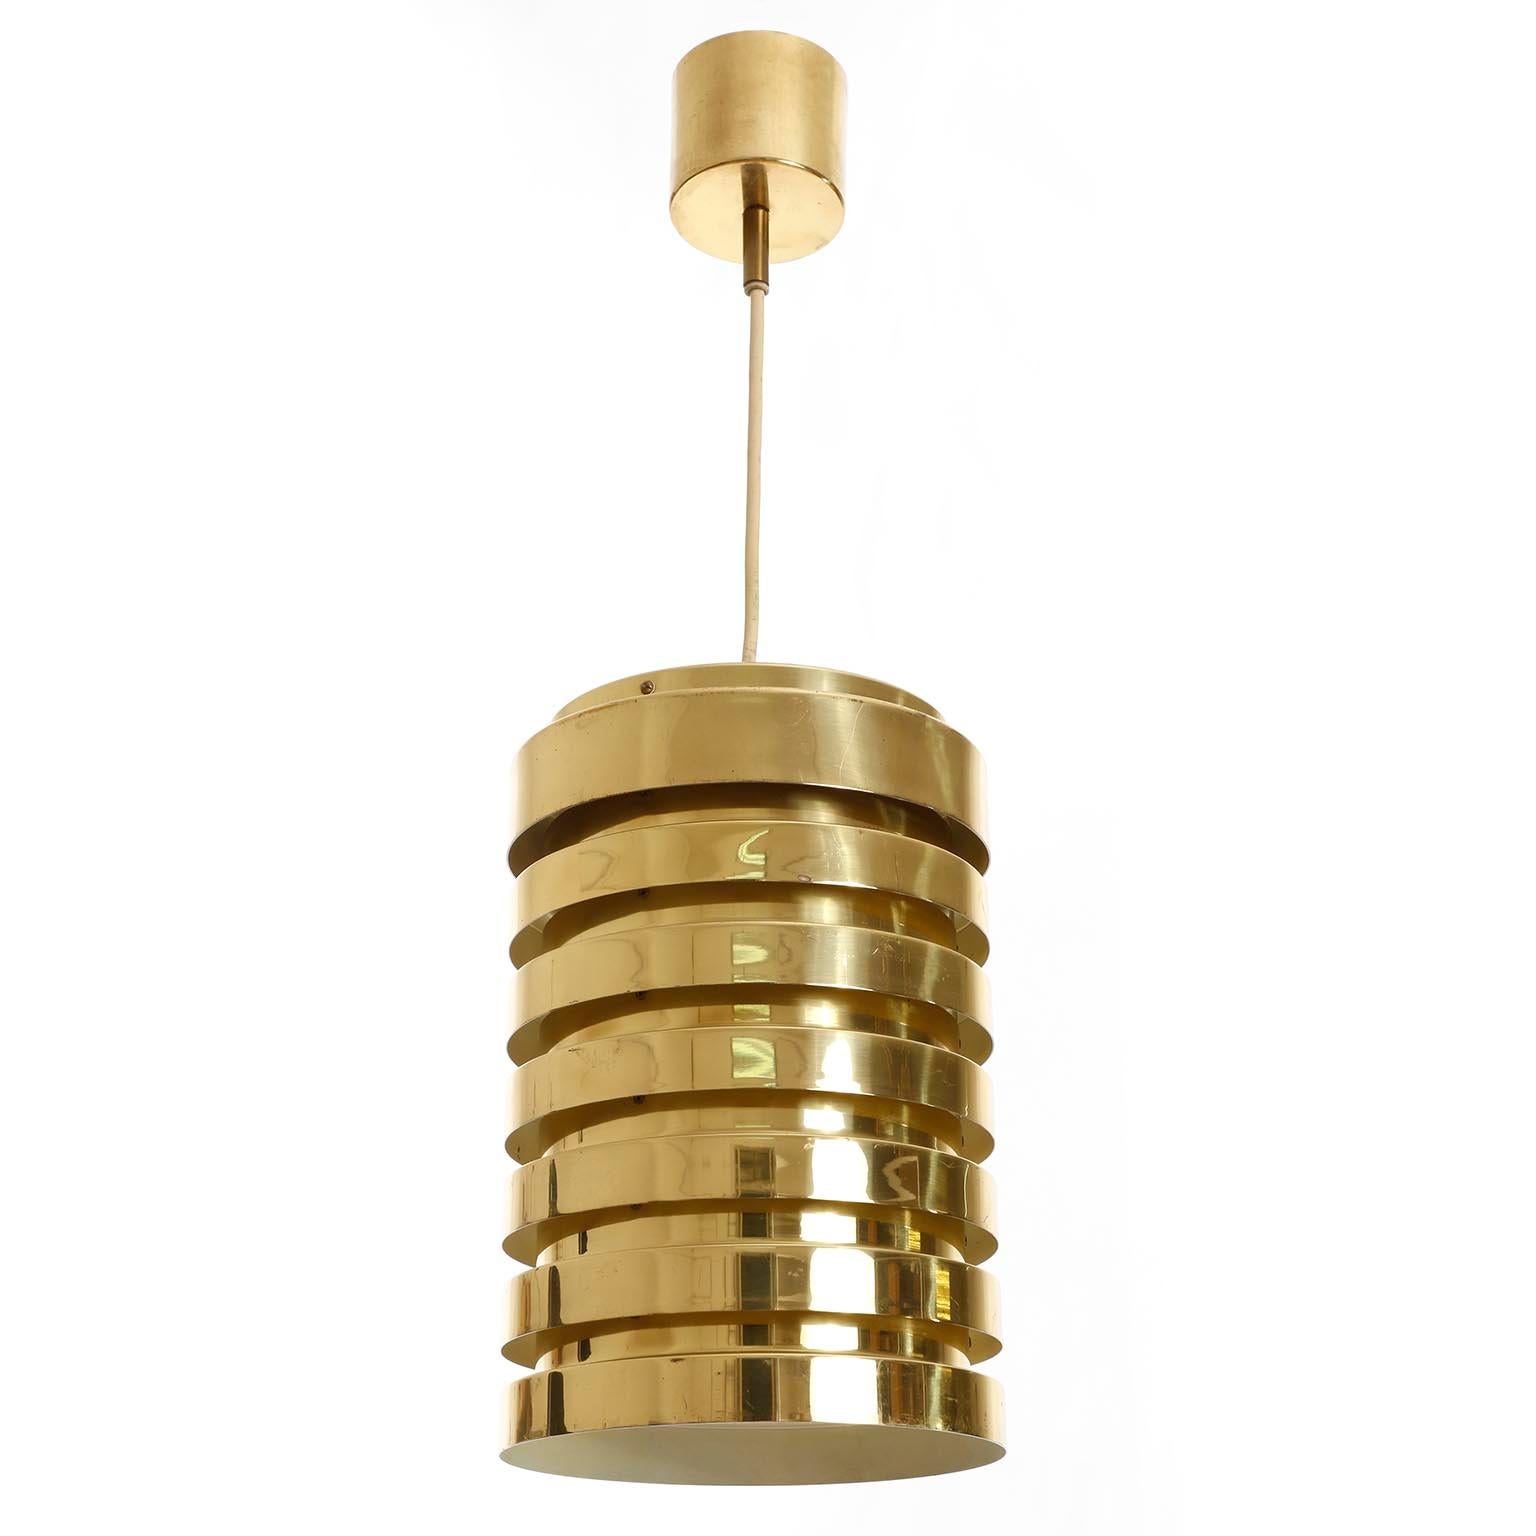 A pair of Mid-Century Modern cylindrical and polished solid brass pendant lights designed by Hans-Agne Jakobsson and manufactured by AB Markaryd circa 1960.
The inside is painted white, aged and thus a bit yellowed.
The height of the body without